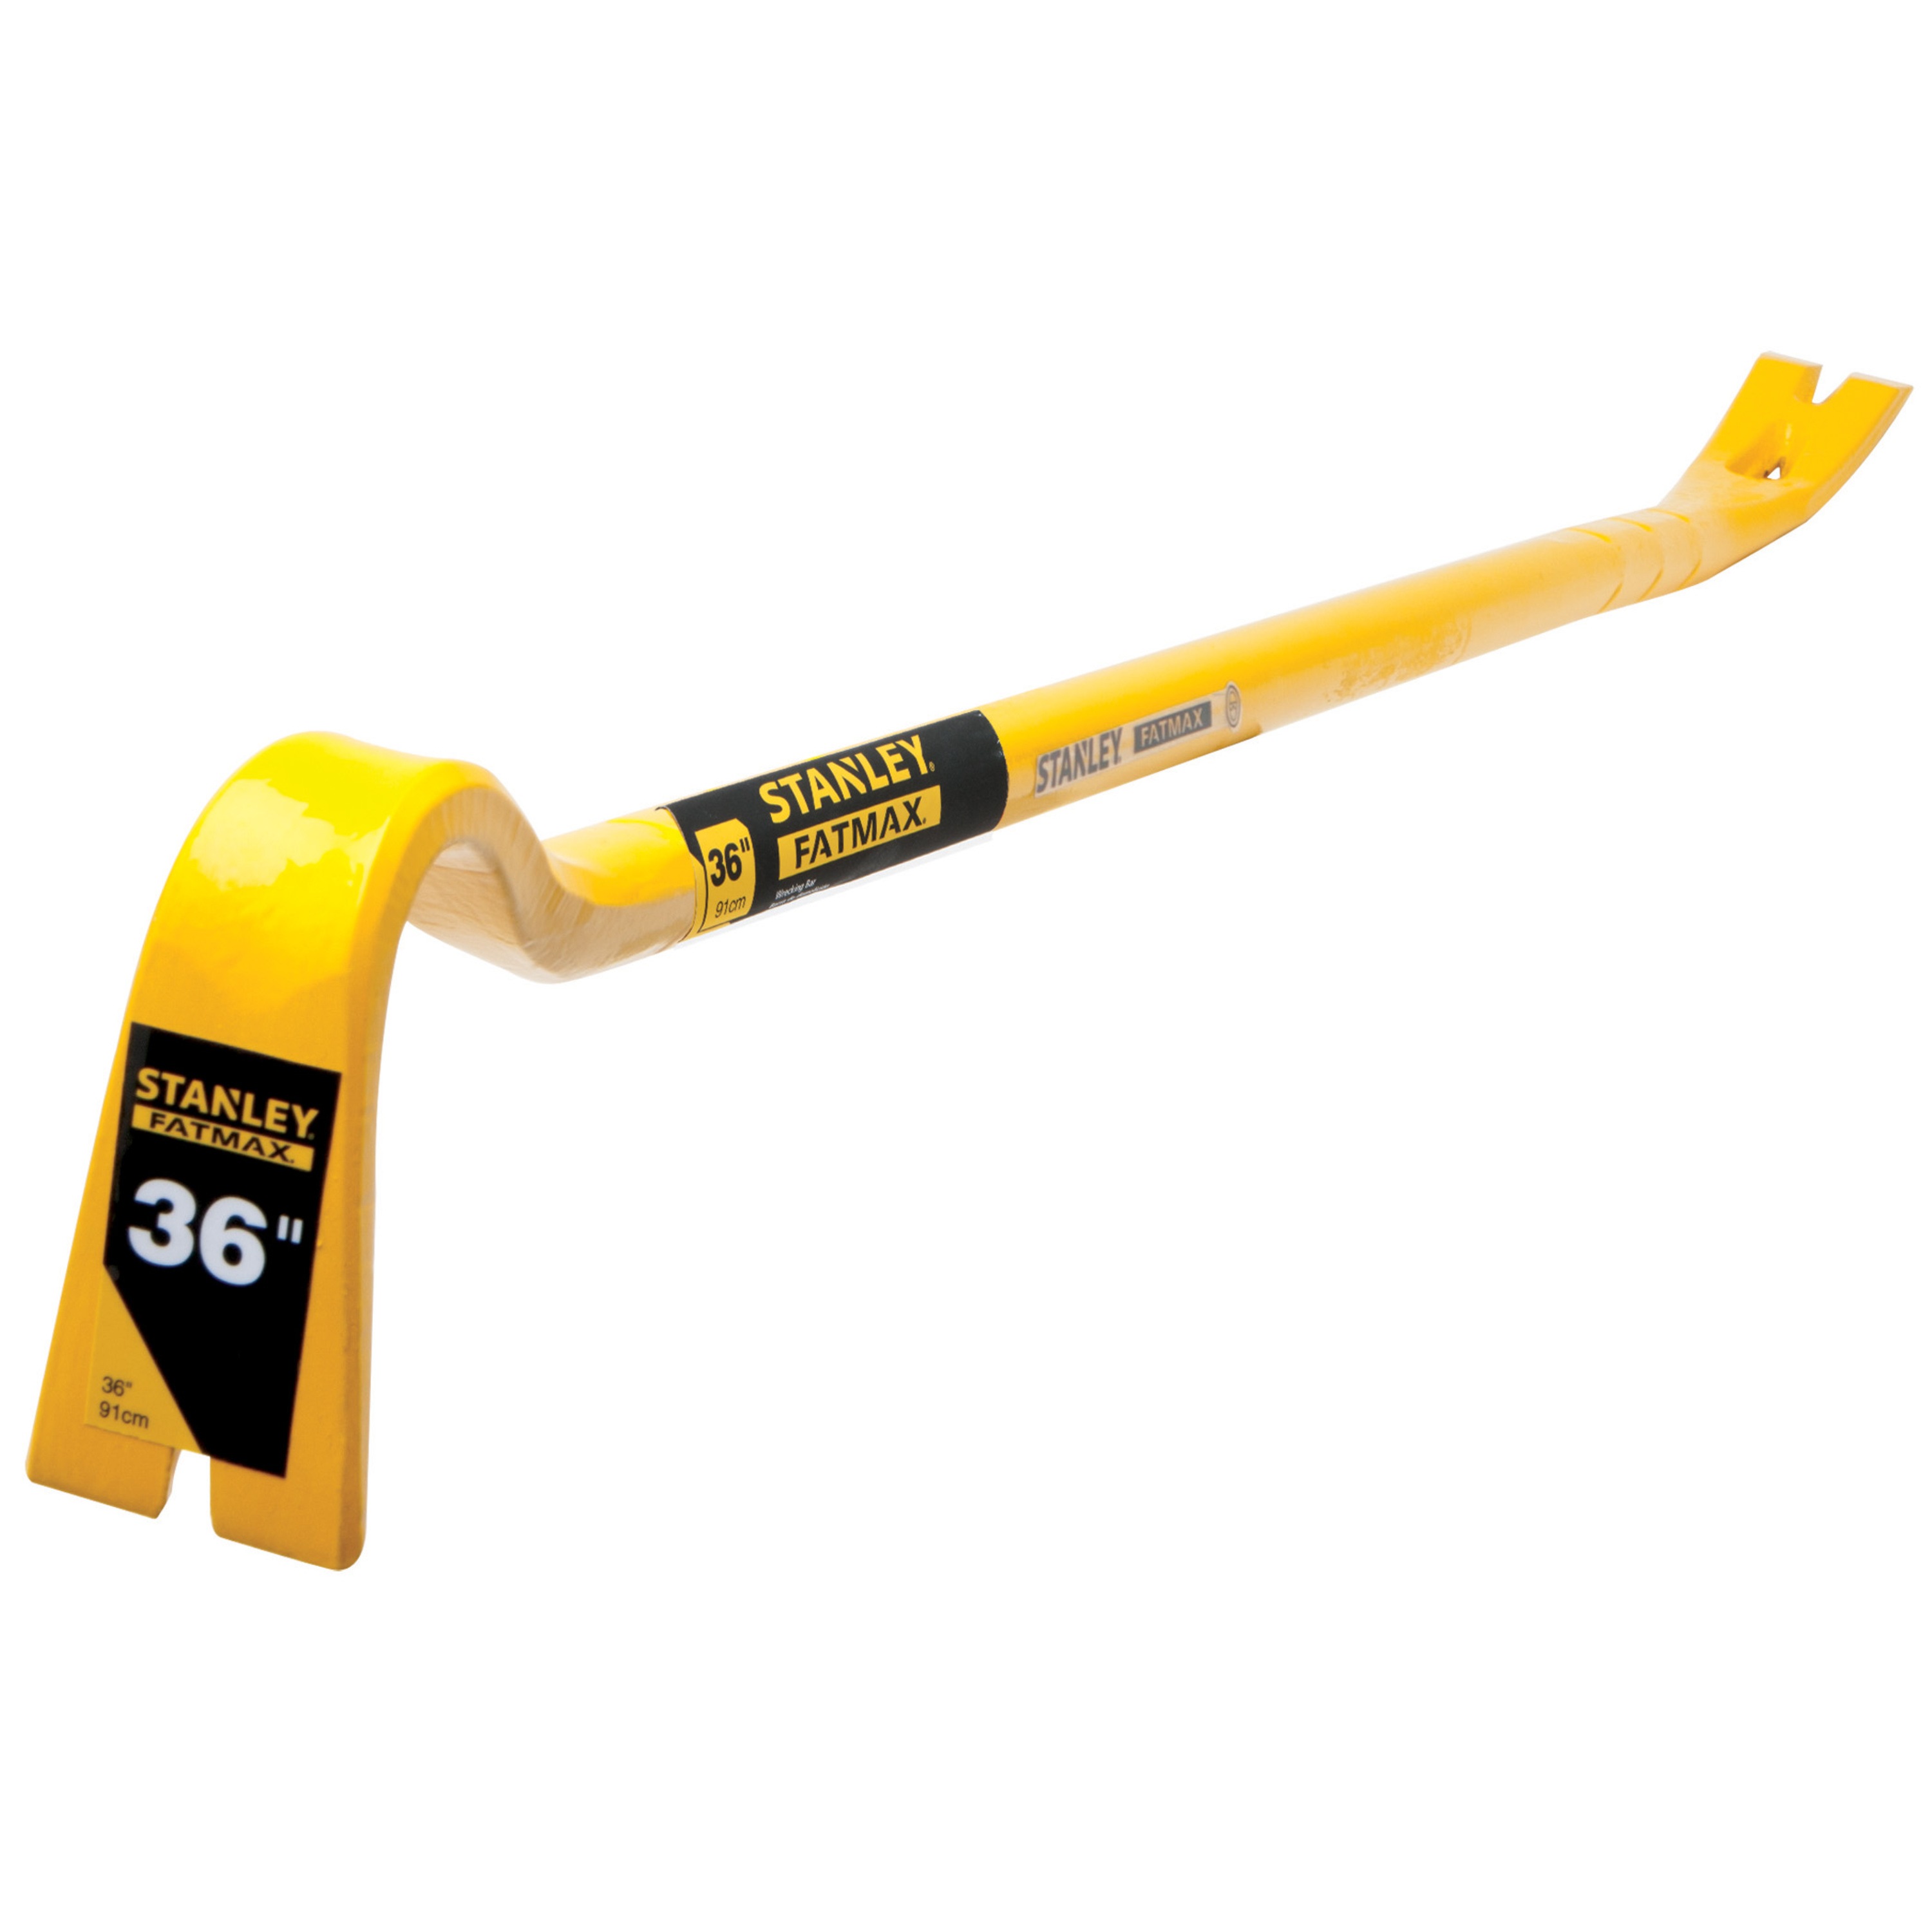 Stanley Tools - 36 in FATMAX Wrecking Bar - 55-104